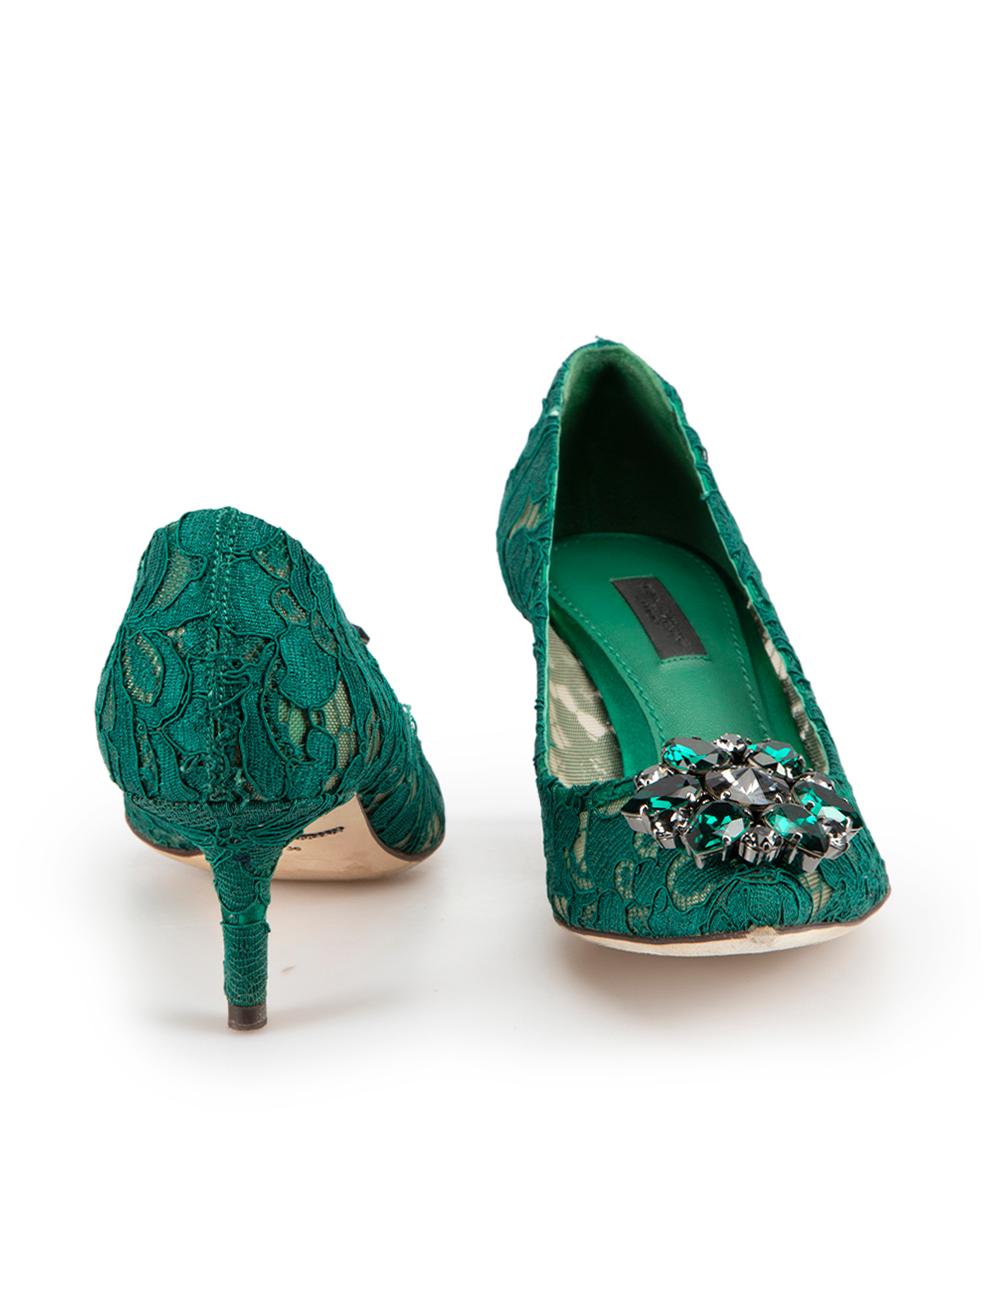 Dolce & Gabbana Green Lace Jewelled Heels Size IT 36 In Excellent Condition For Sale In London, GB